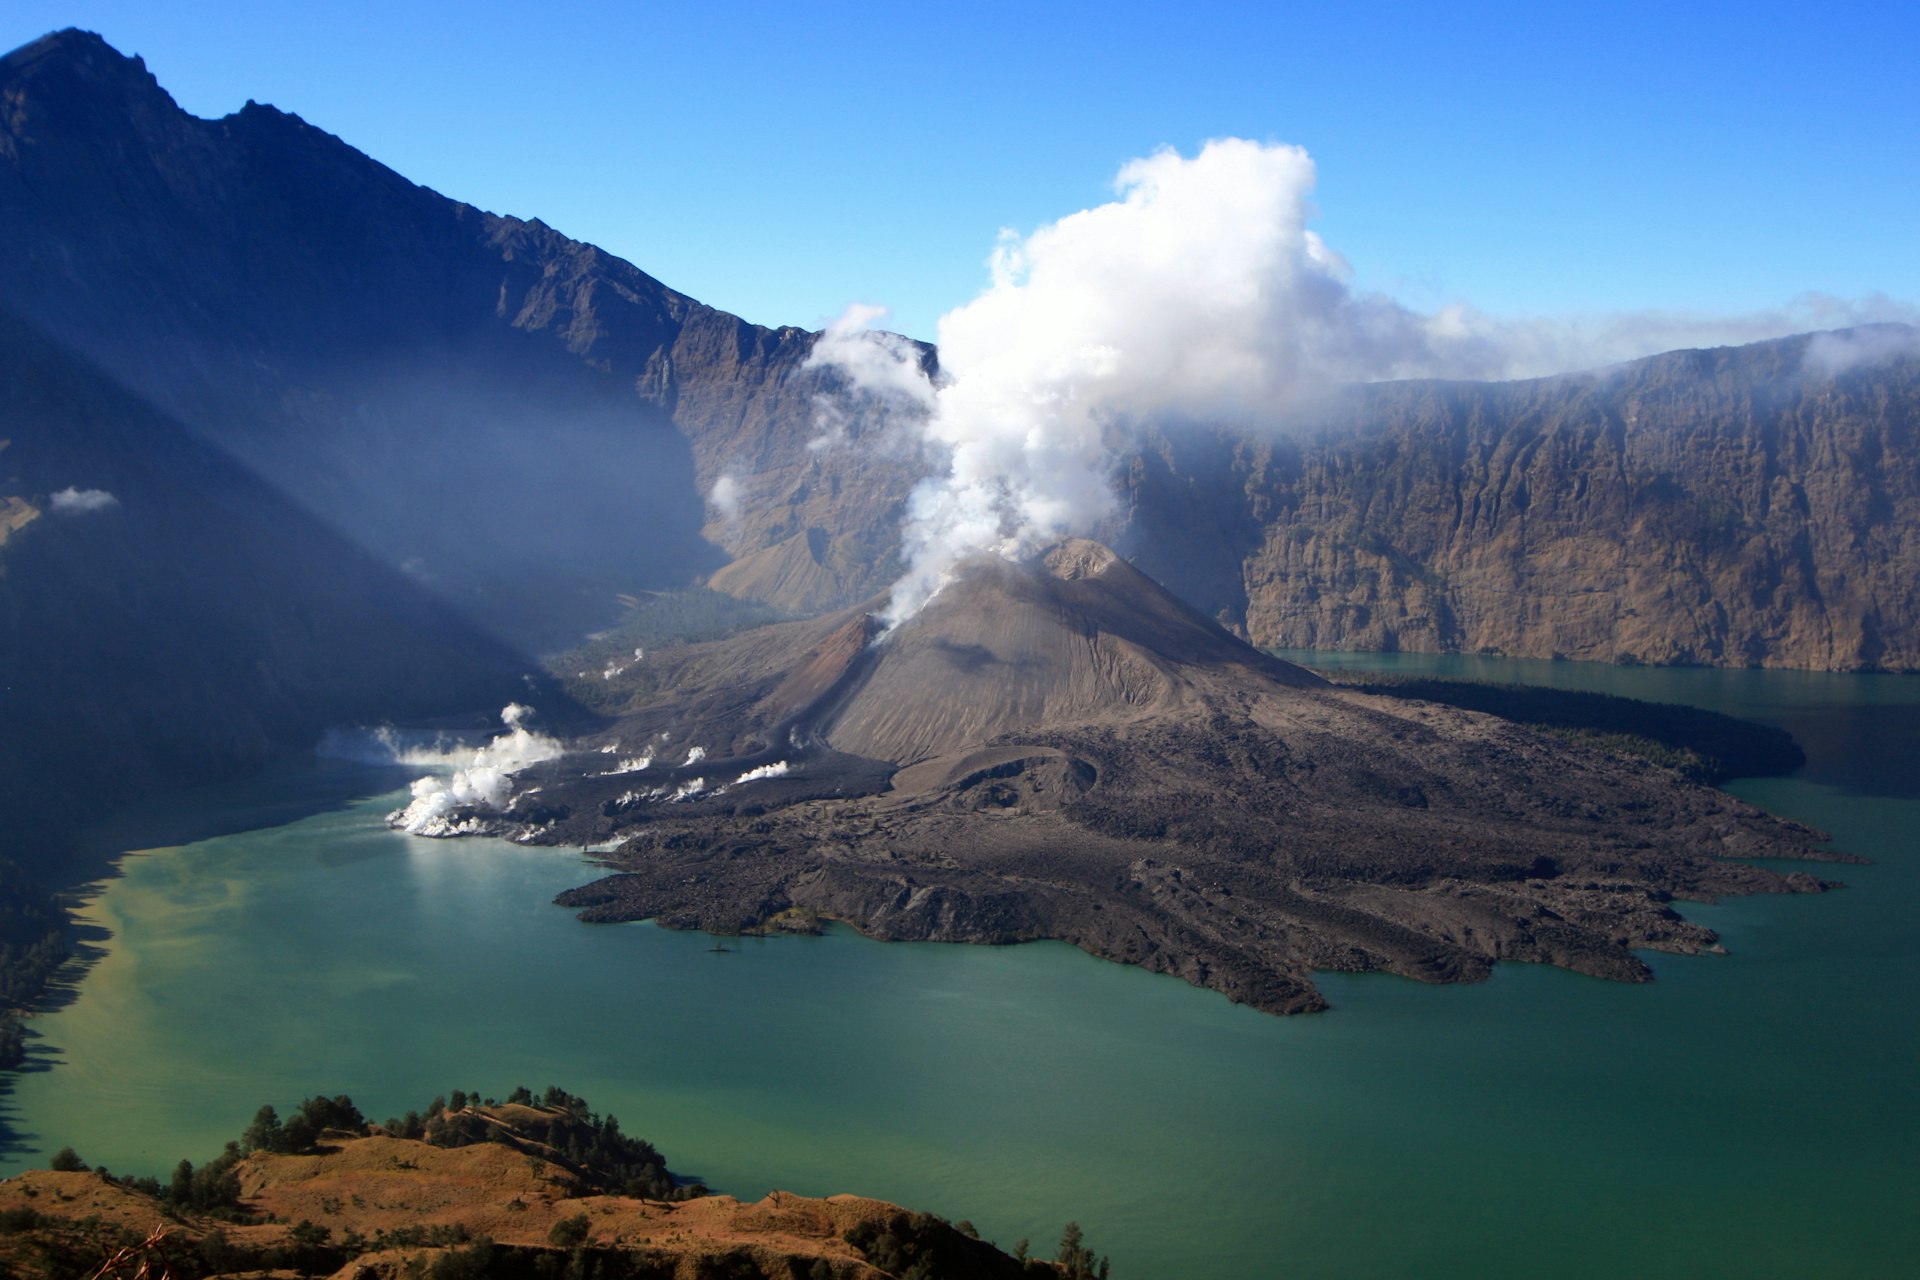 Mt Rinjani's ash emissions bring fertility to the island's rice fields and tobacco crops